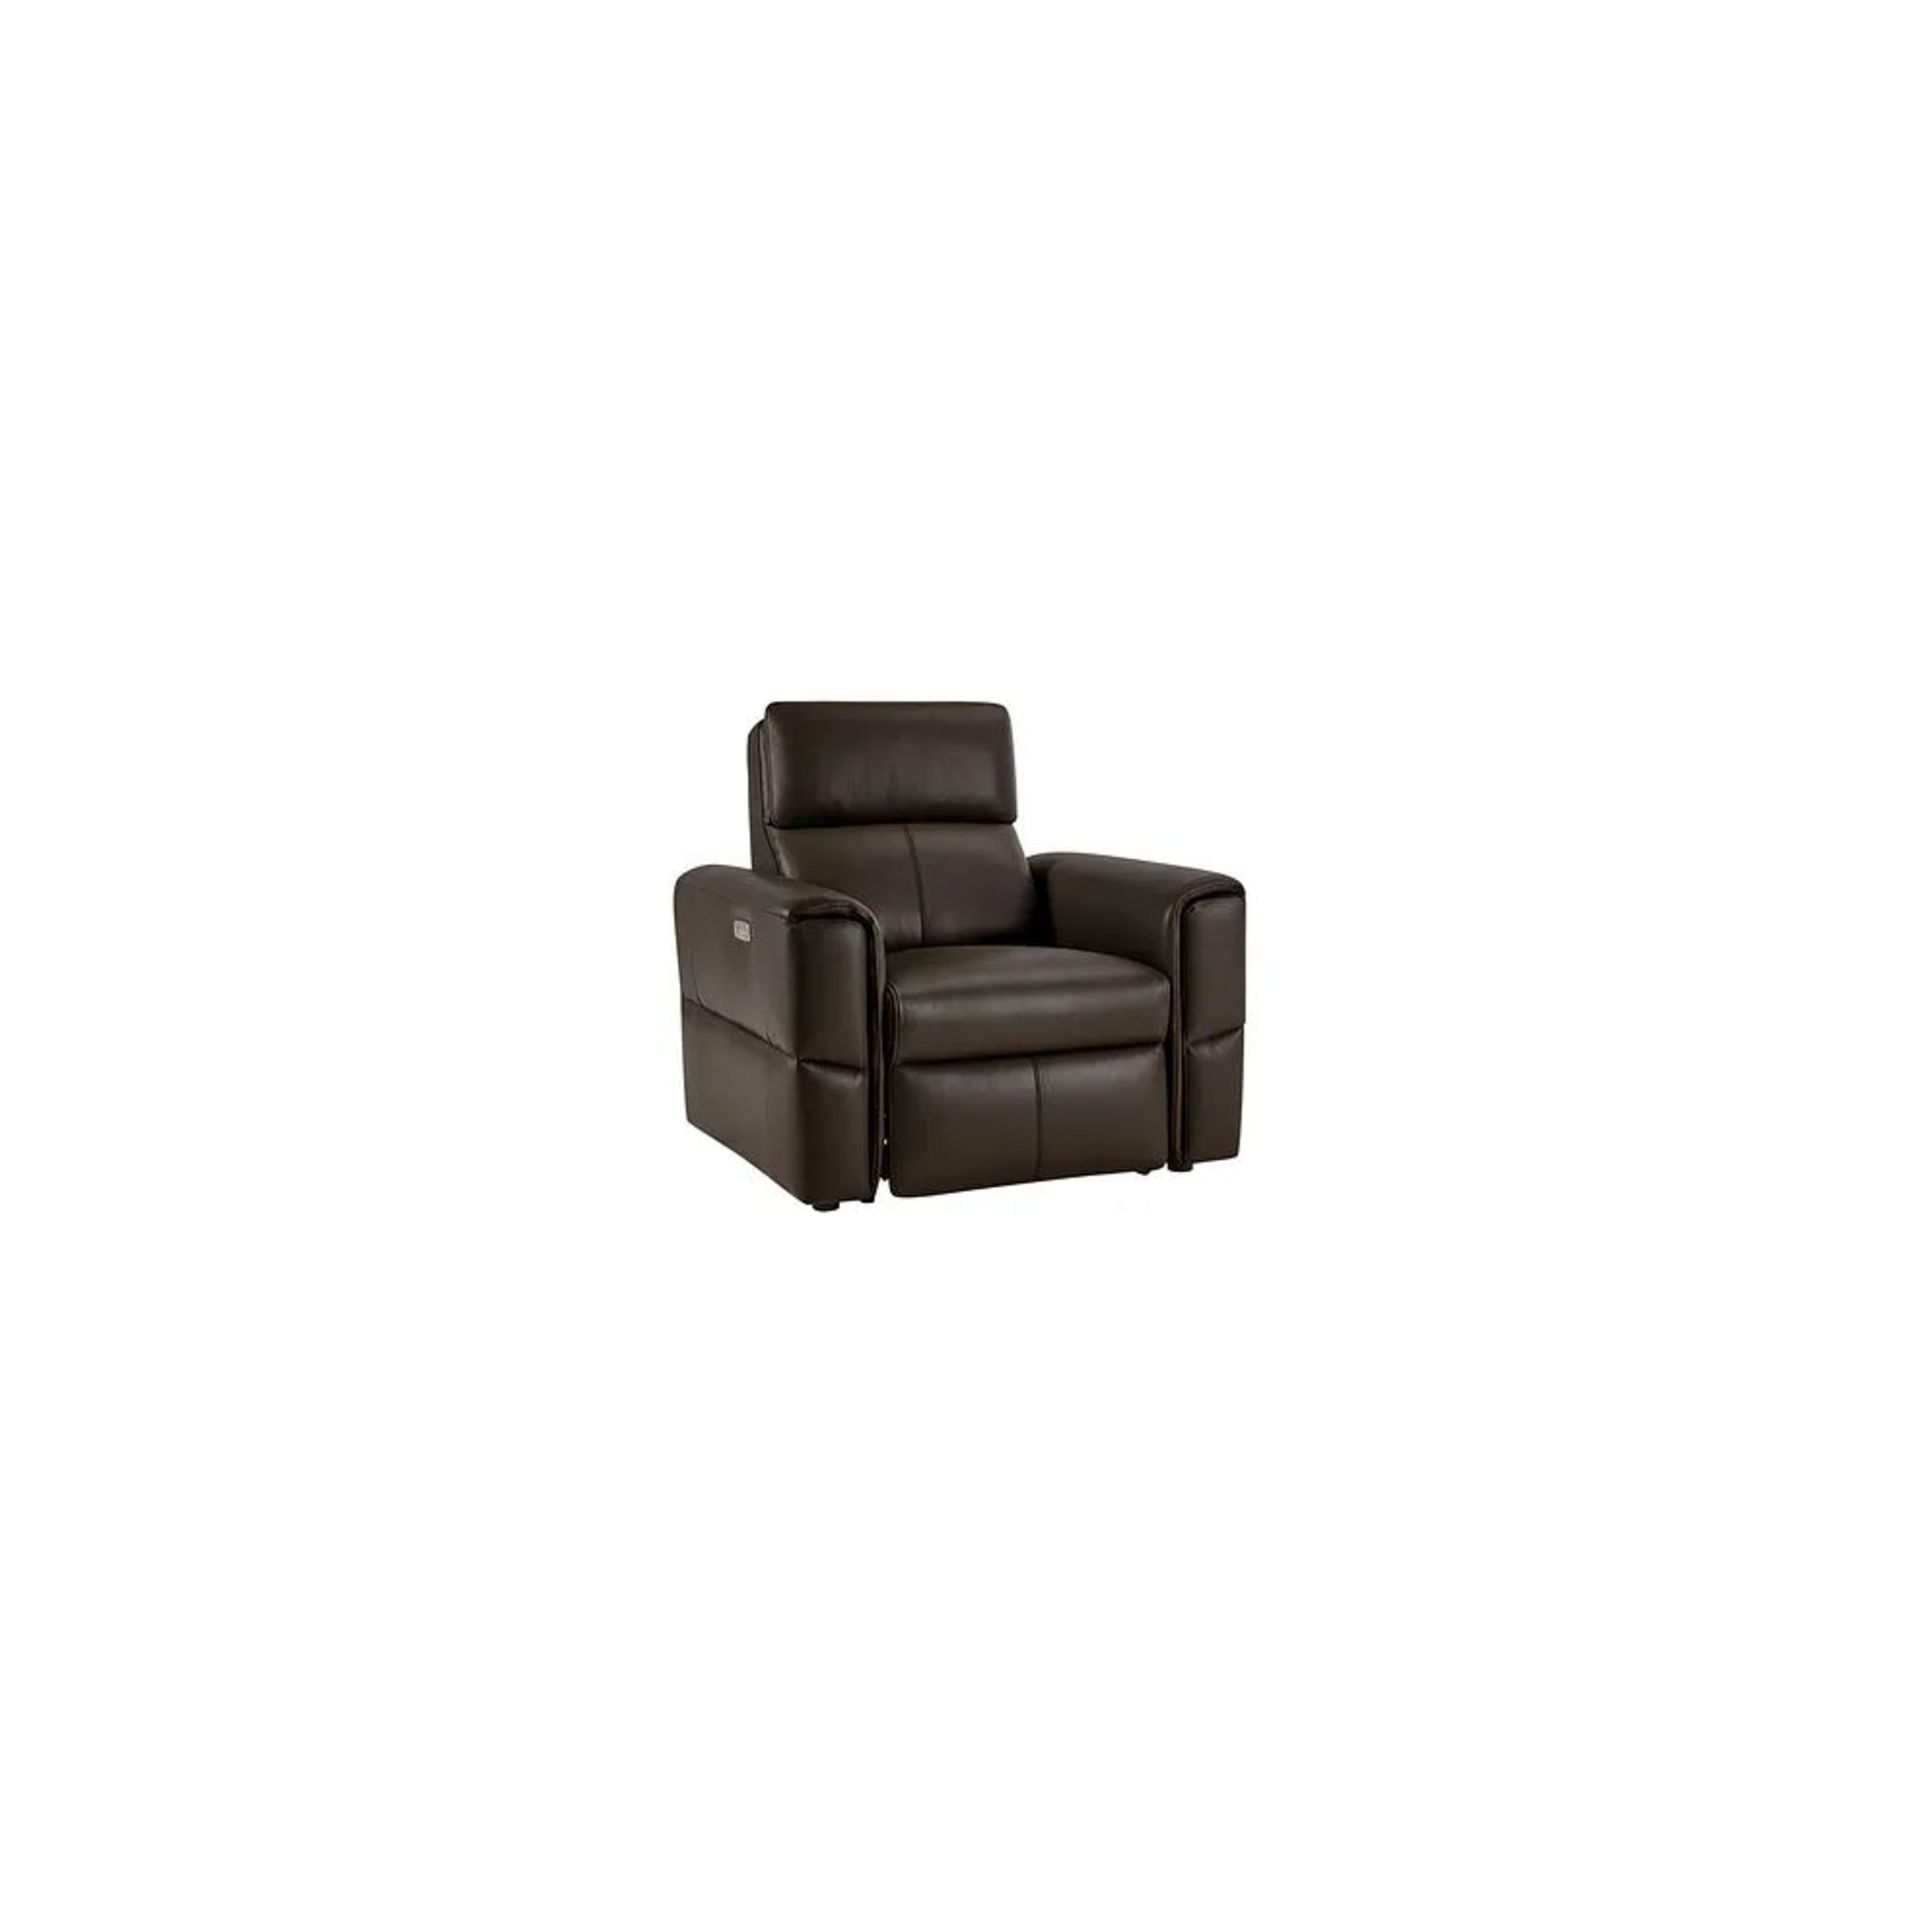 BRAND NEW SAMSON Electric Recliner Armchair - TWO TONE BROWN LEATHER. RRP £1249. Showcasing neat,